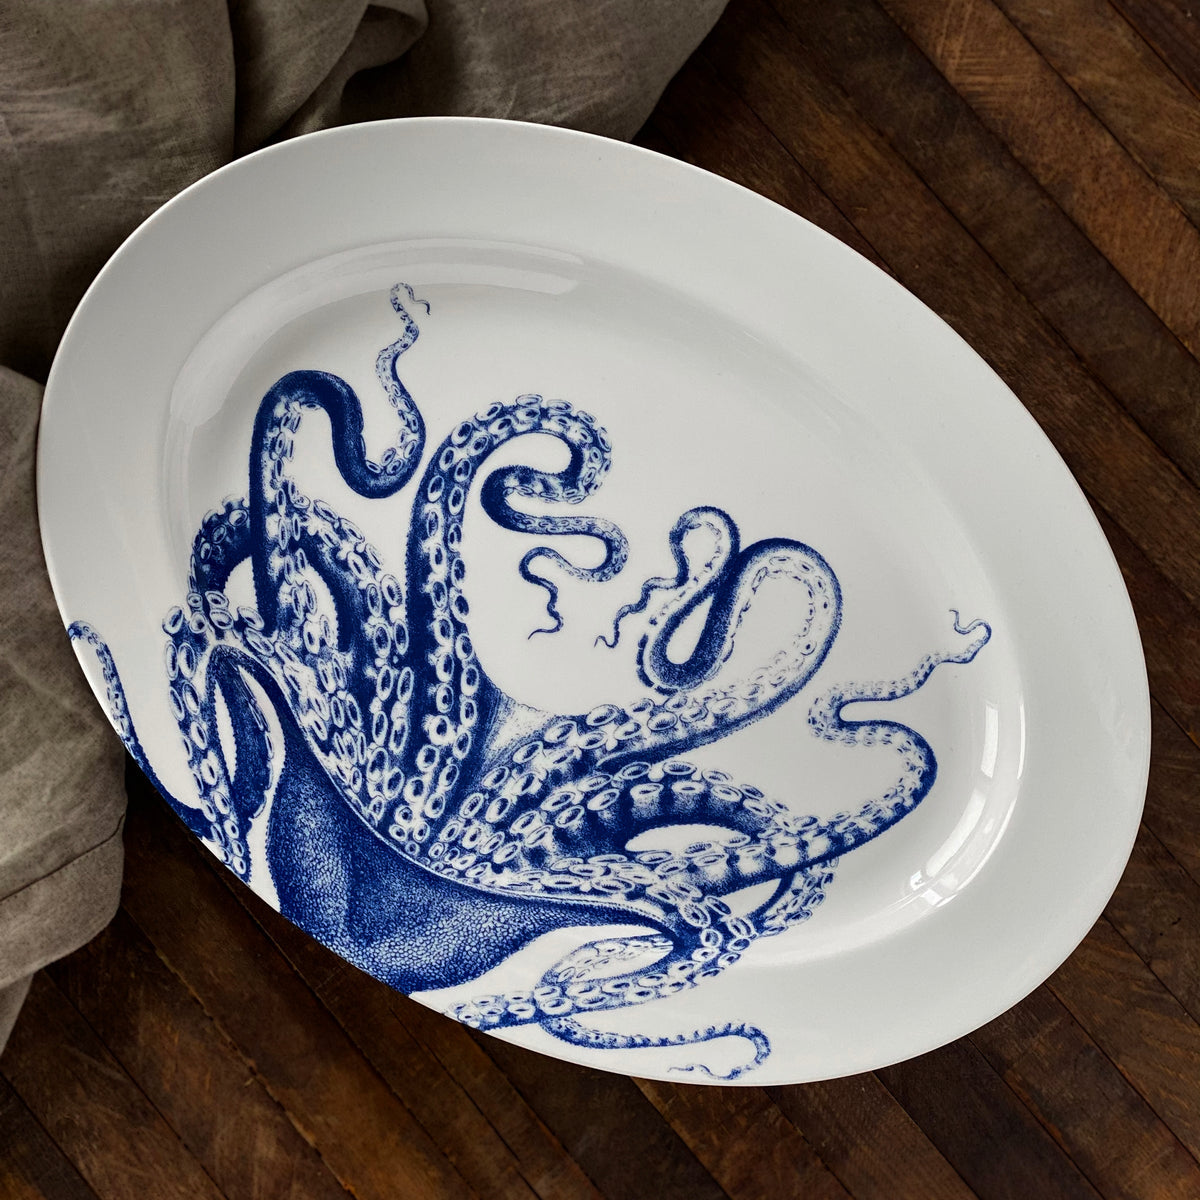 A high-fired porcelain oval dish, the Lucy Oval Rimmed Platter by Caskata Artisanal Home, featuring a blue octopus illustration on the inside, placed on a wooden surface with gray fabric partially visible in the background.